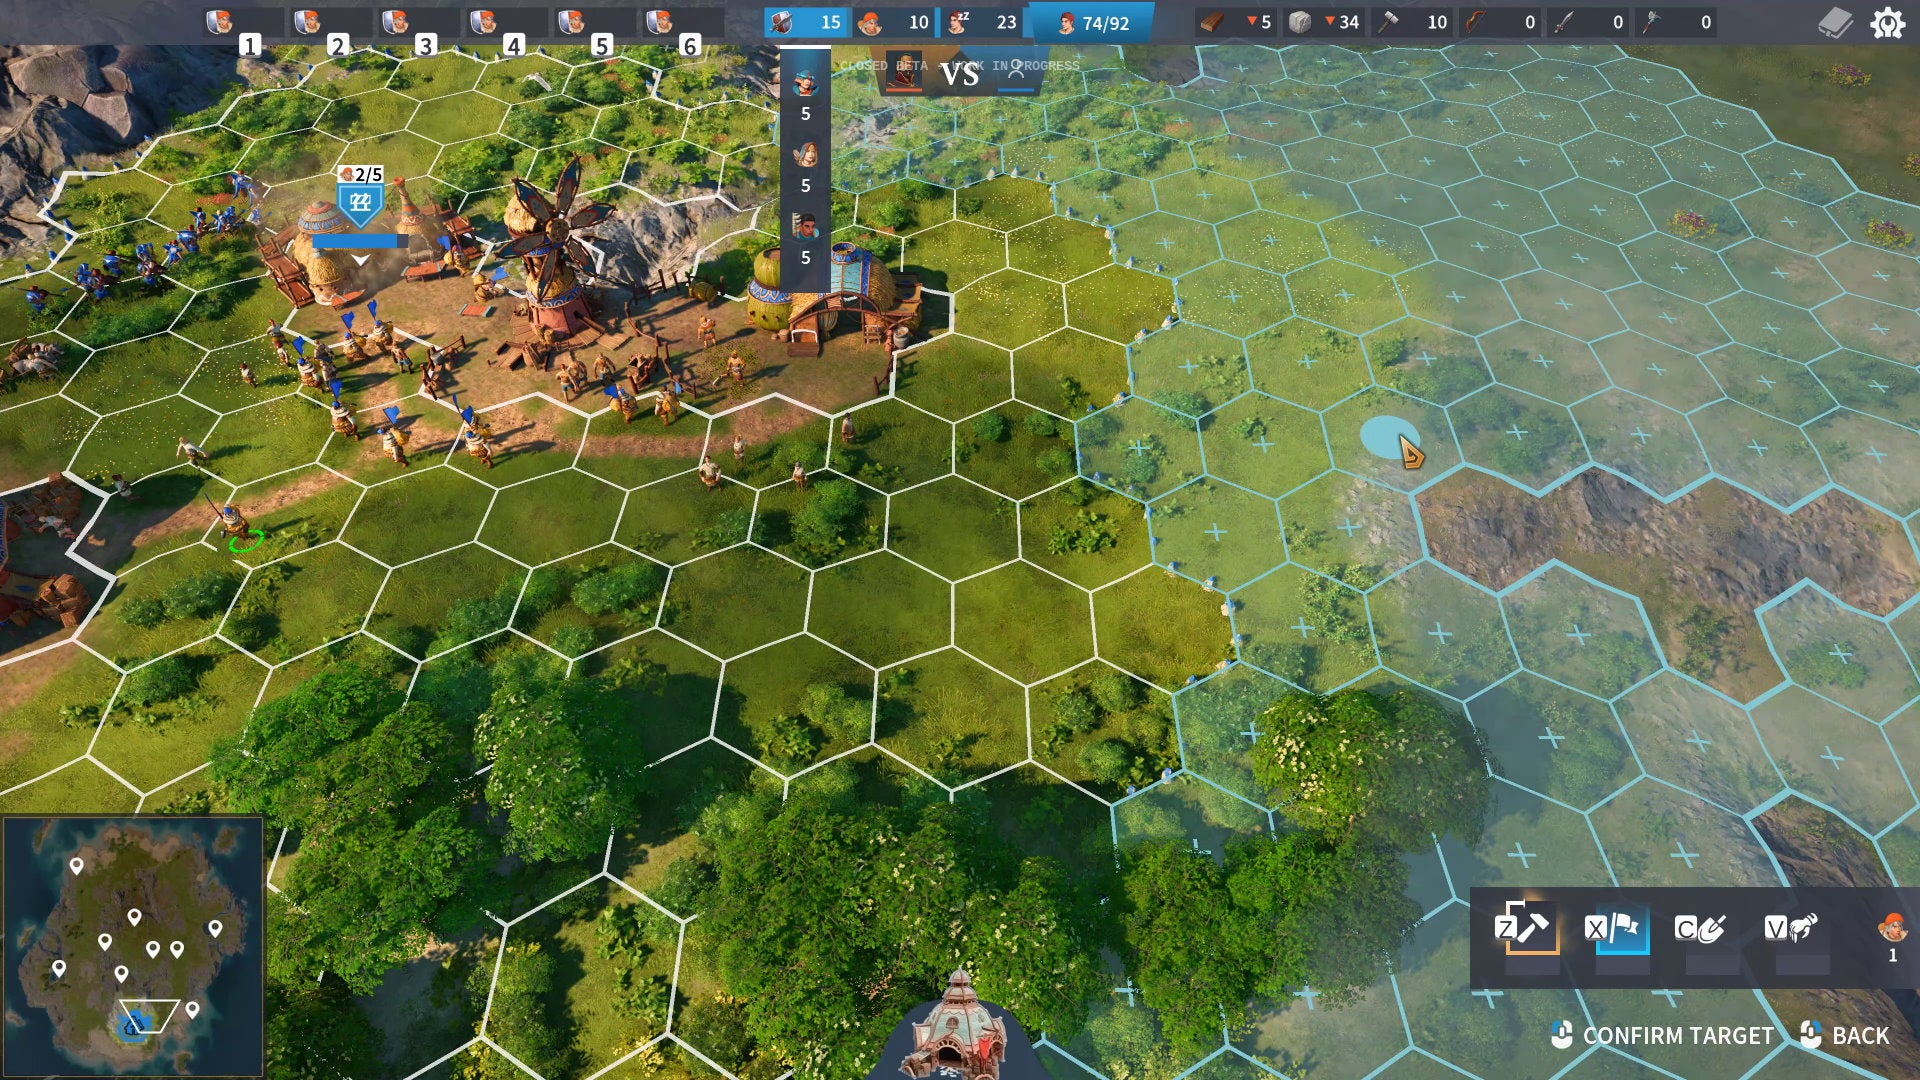 A grassy scene showing a hexagonal lattice of accessible tiles that you can explore in The Settlers